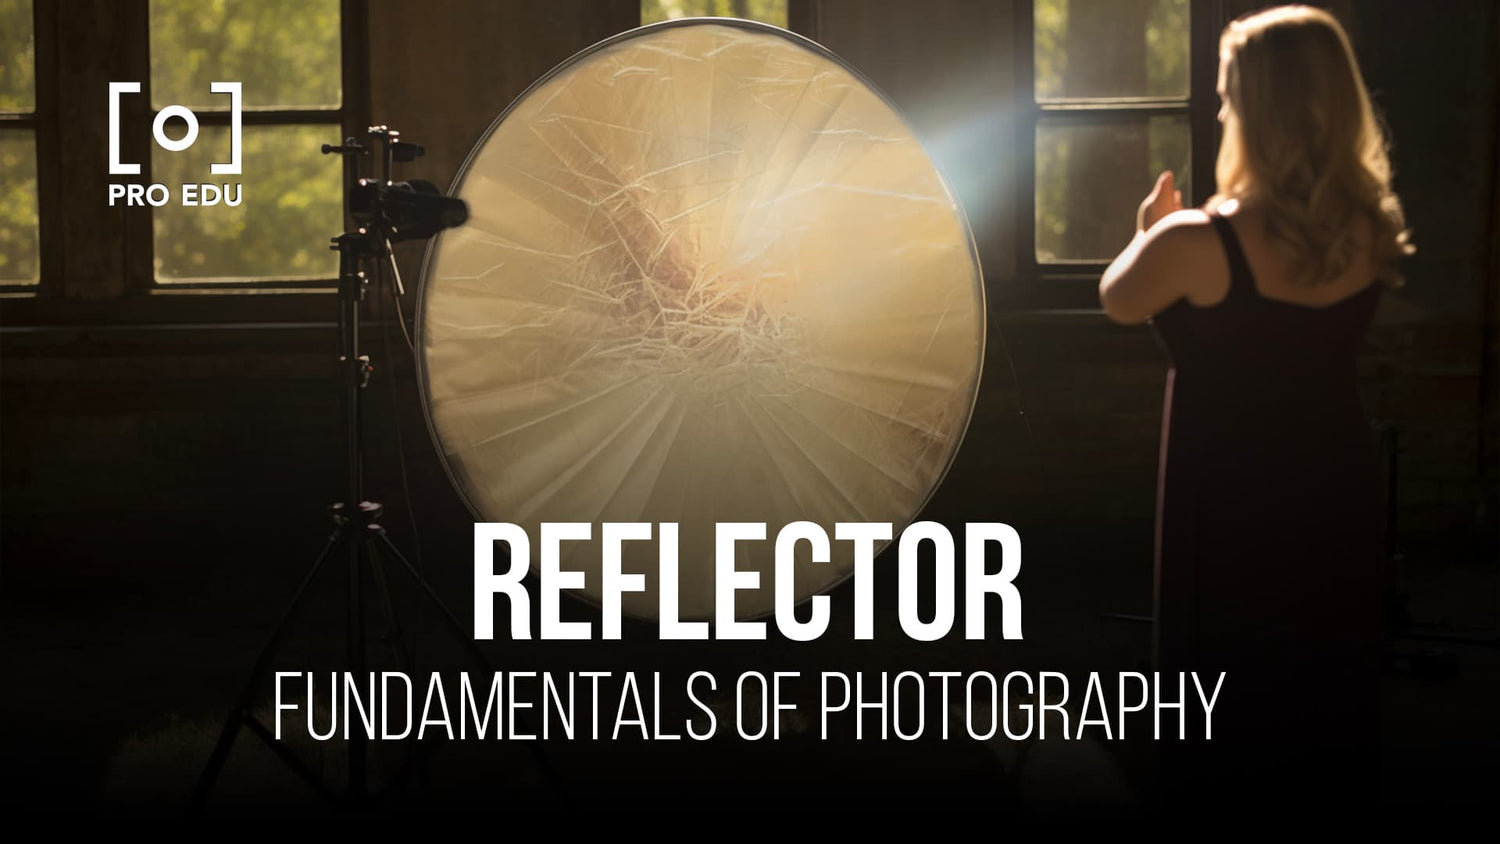 Shaping light beautifully with reflectors in photography, a creative tool